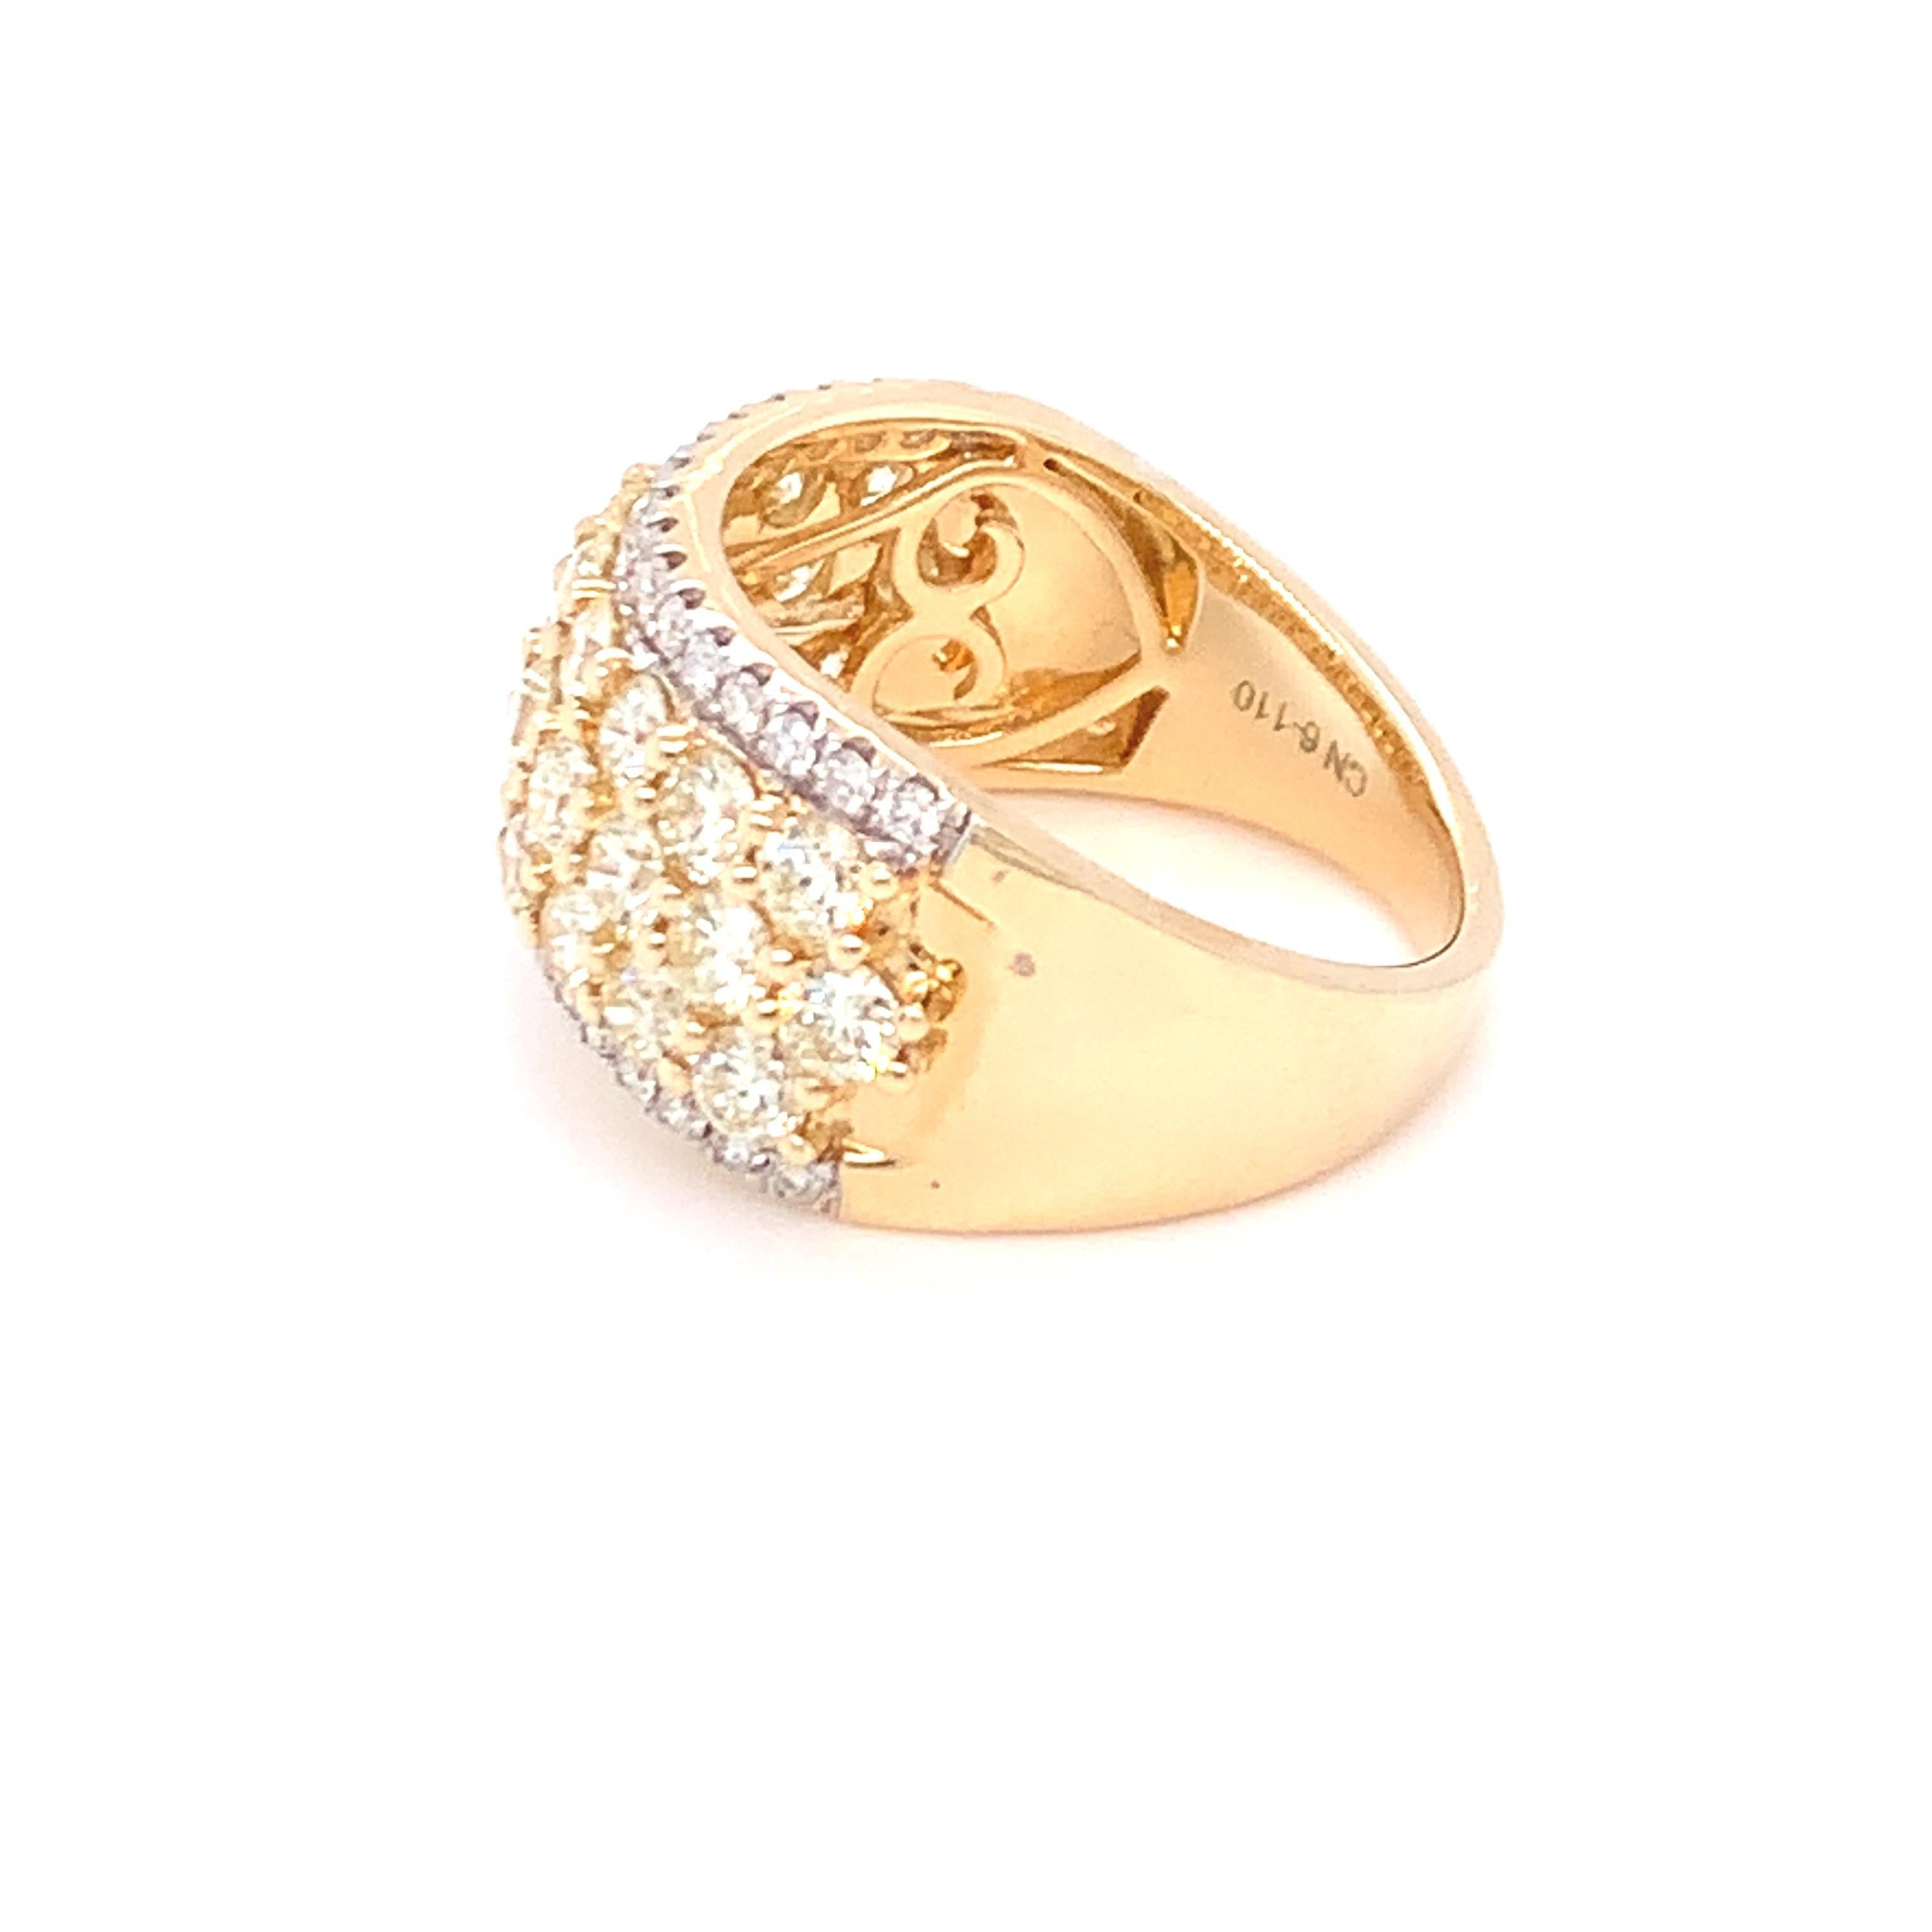 2.50 Carat Yellow & White Diamond Band Ring in 14k Yellow Gold In New Condition For Sale In Trumbull, CT